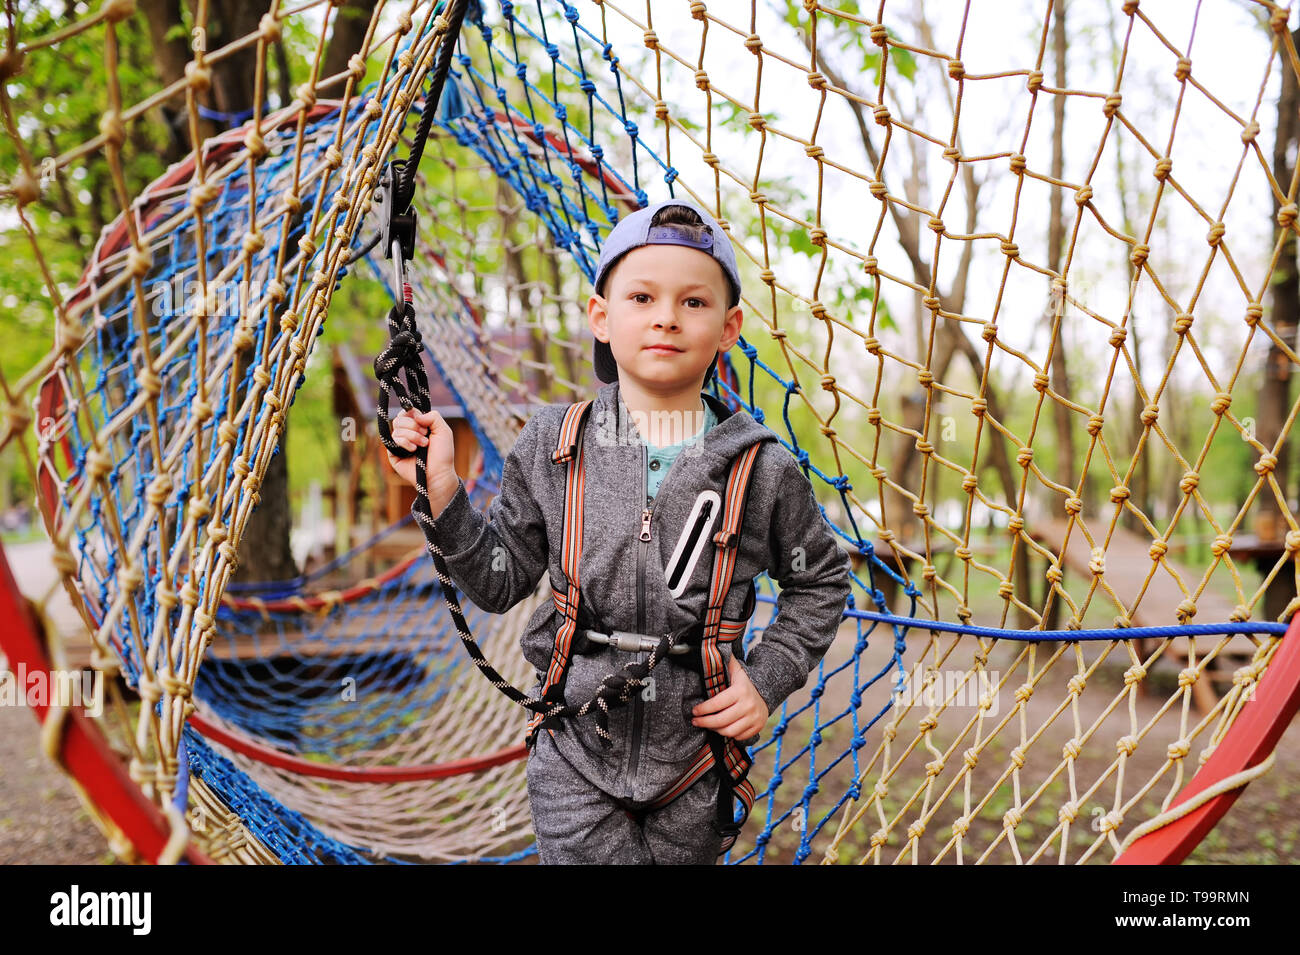 child preschooler boy is an obstacle in a safety alpinism equipment high rope course Stock Photo